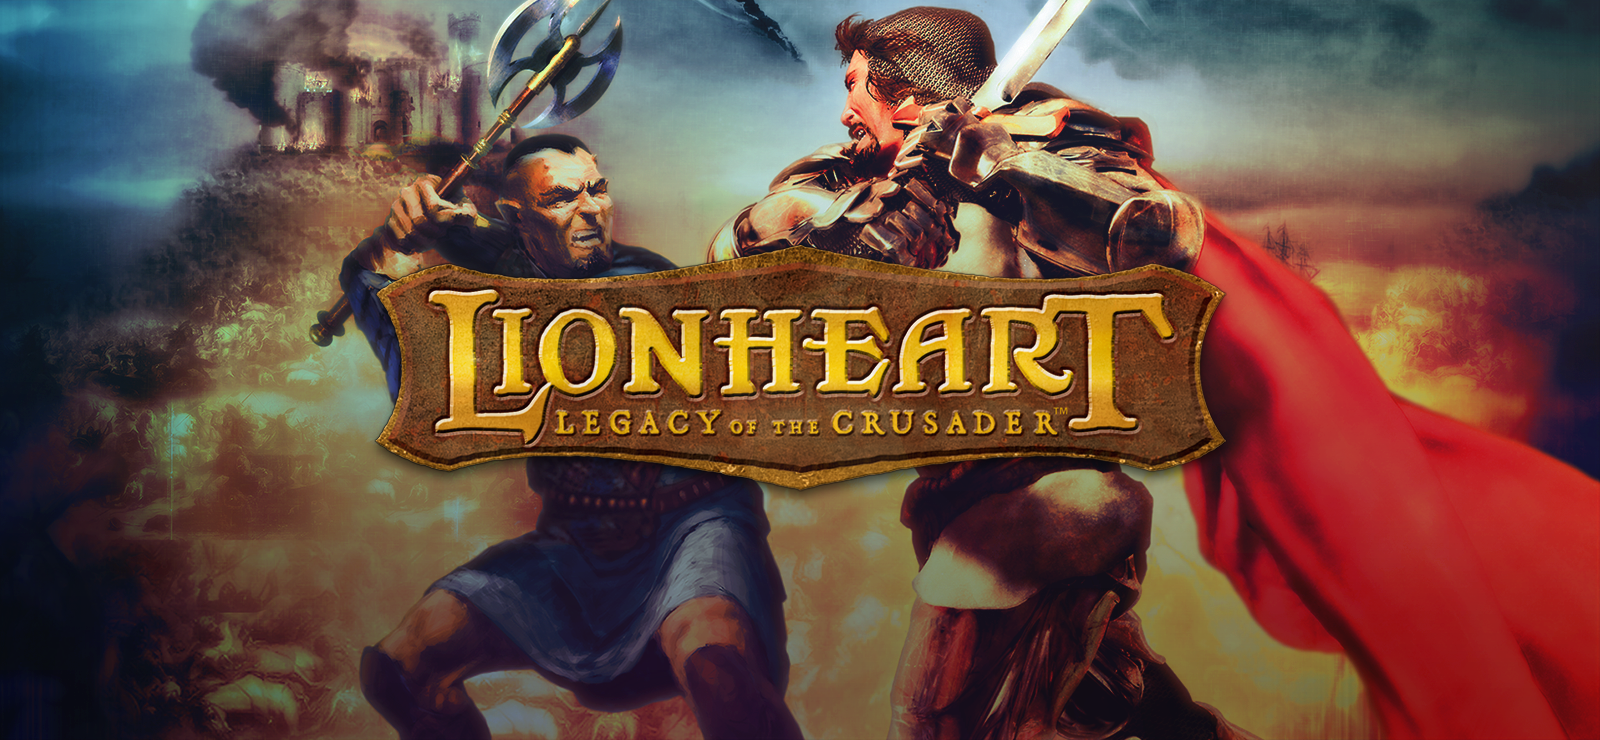 Lionheart: Legacy Of The Crusader